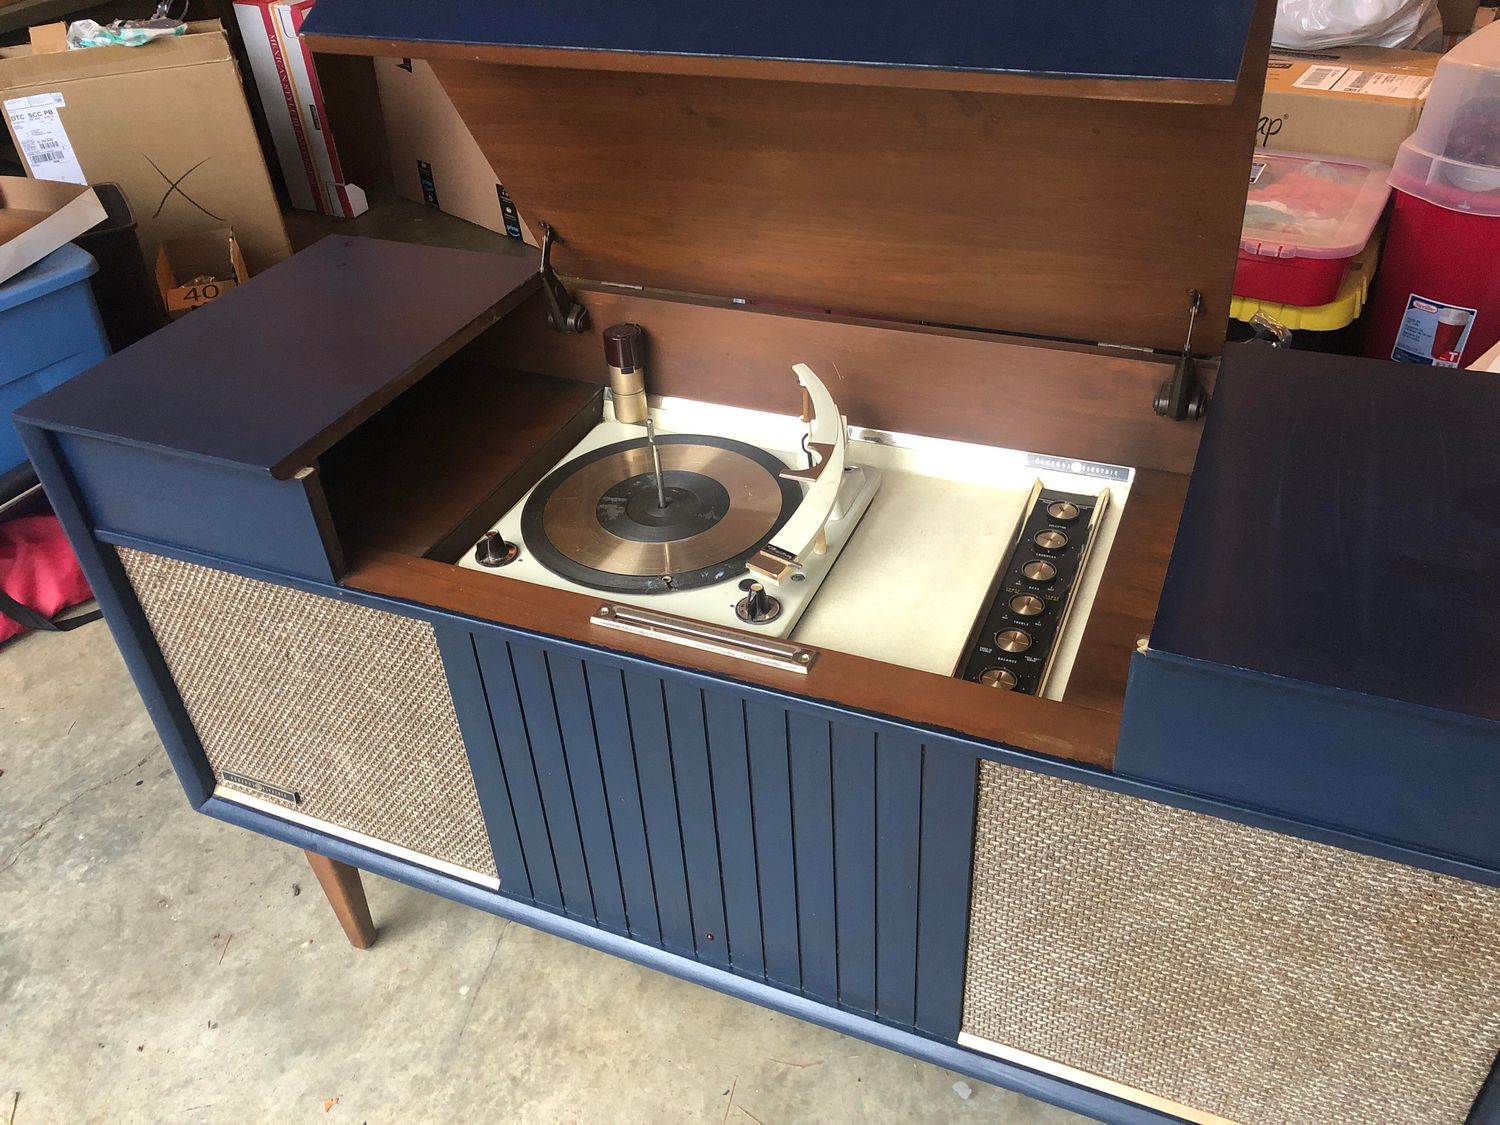 When An Old Lp Turntable Was Revolving At 33